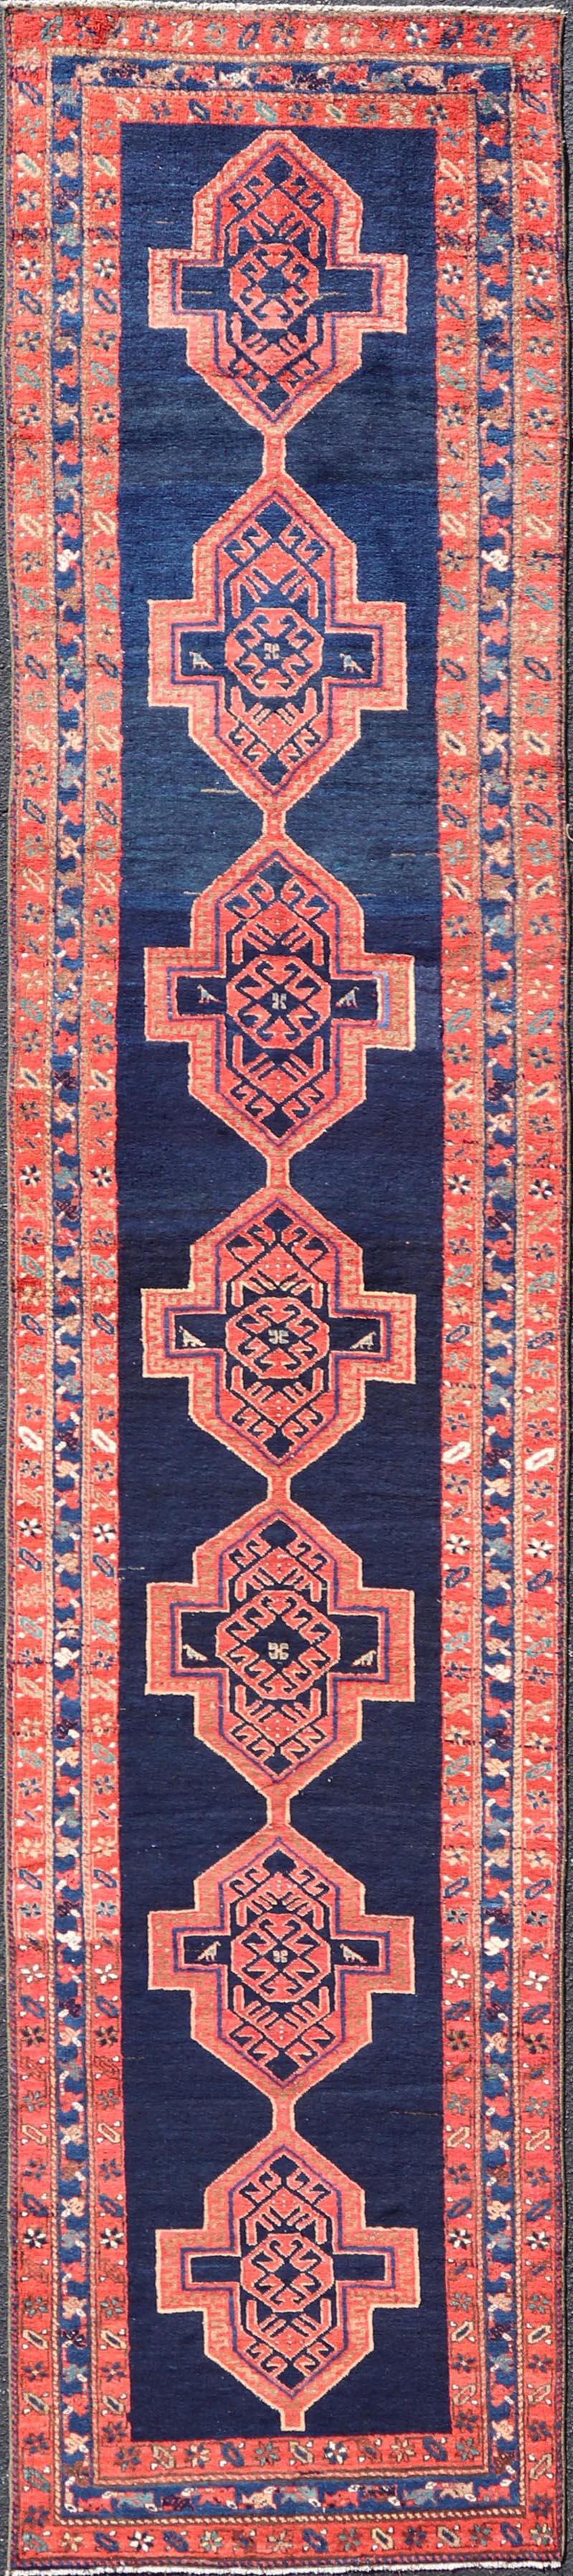 Antique Persian Azerbaijan Runner in Navy Blue Background with Large Medallions  For Sale